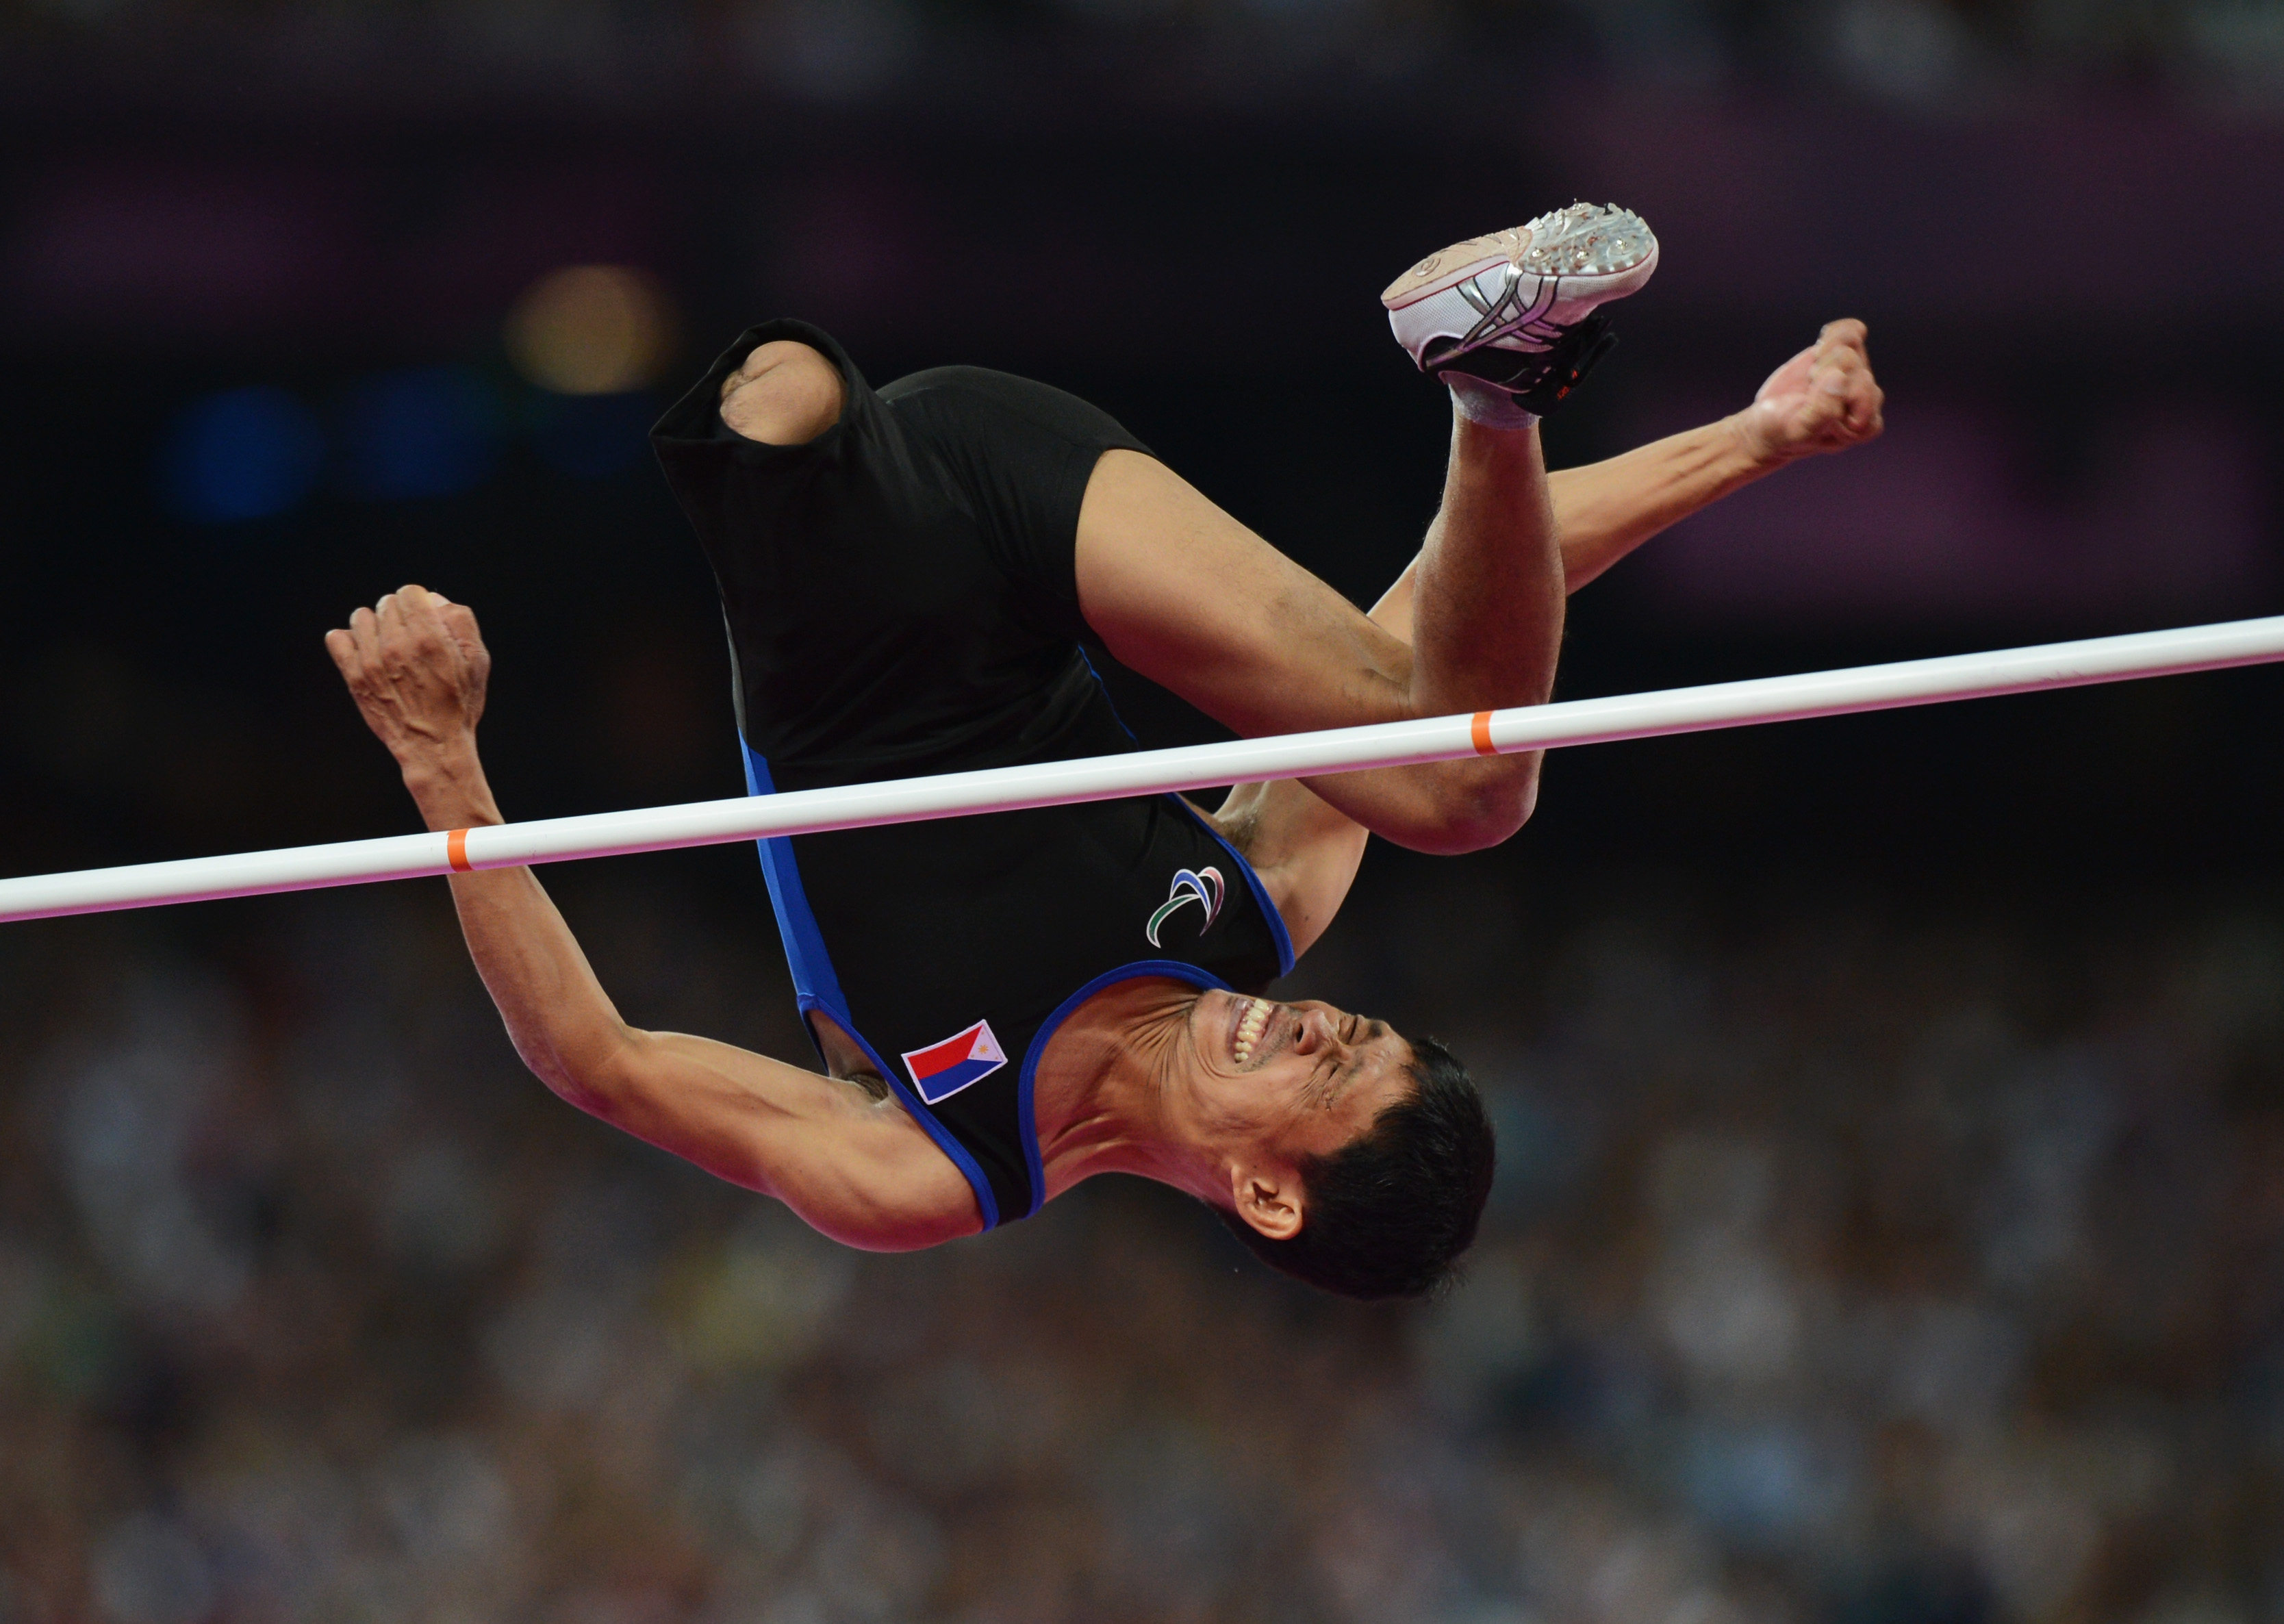 Andy Avellana of the Philippines jumps over the bar in the men's high jump.